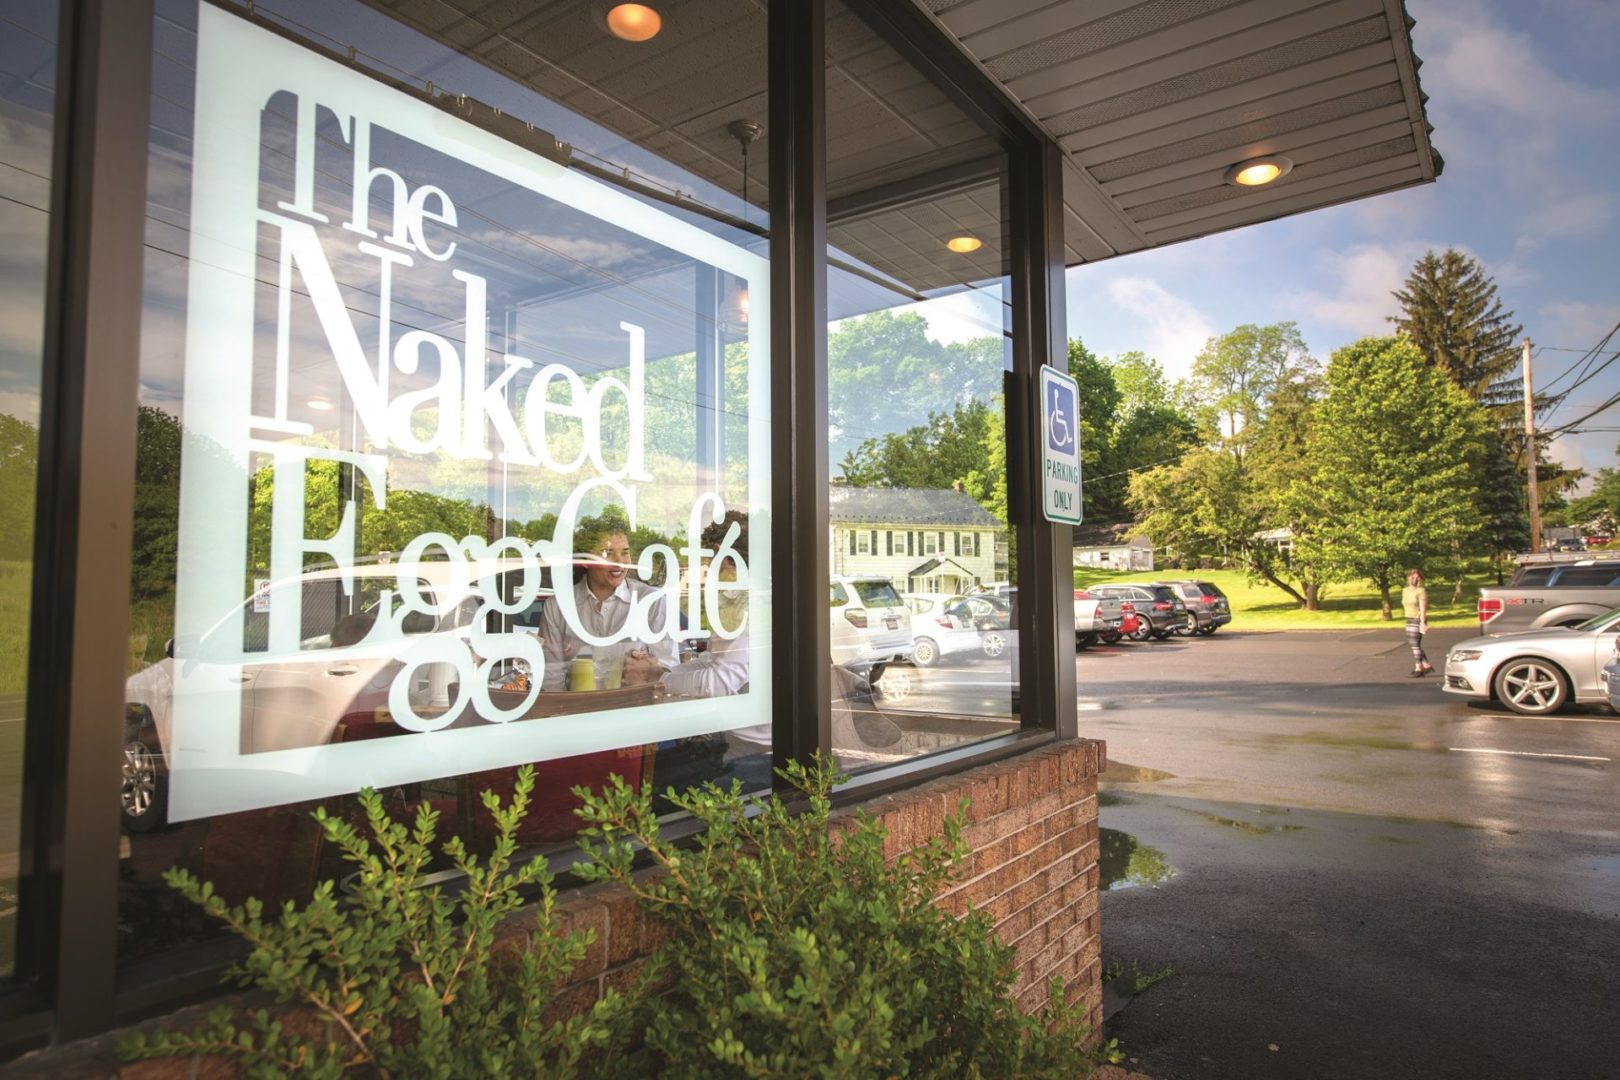 Breakfast, Elevated: The Naked Egg Café features American-style cooking  with inspiration from the Southwest and Mexico, Town&Gown